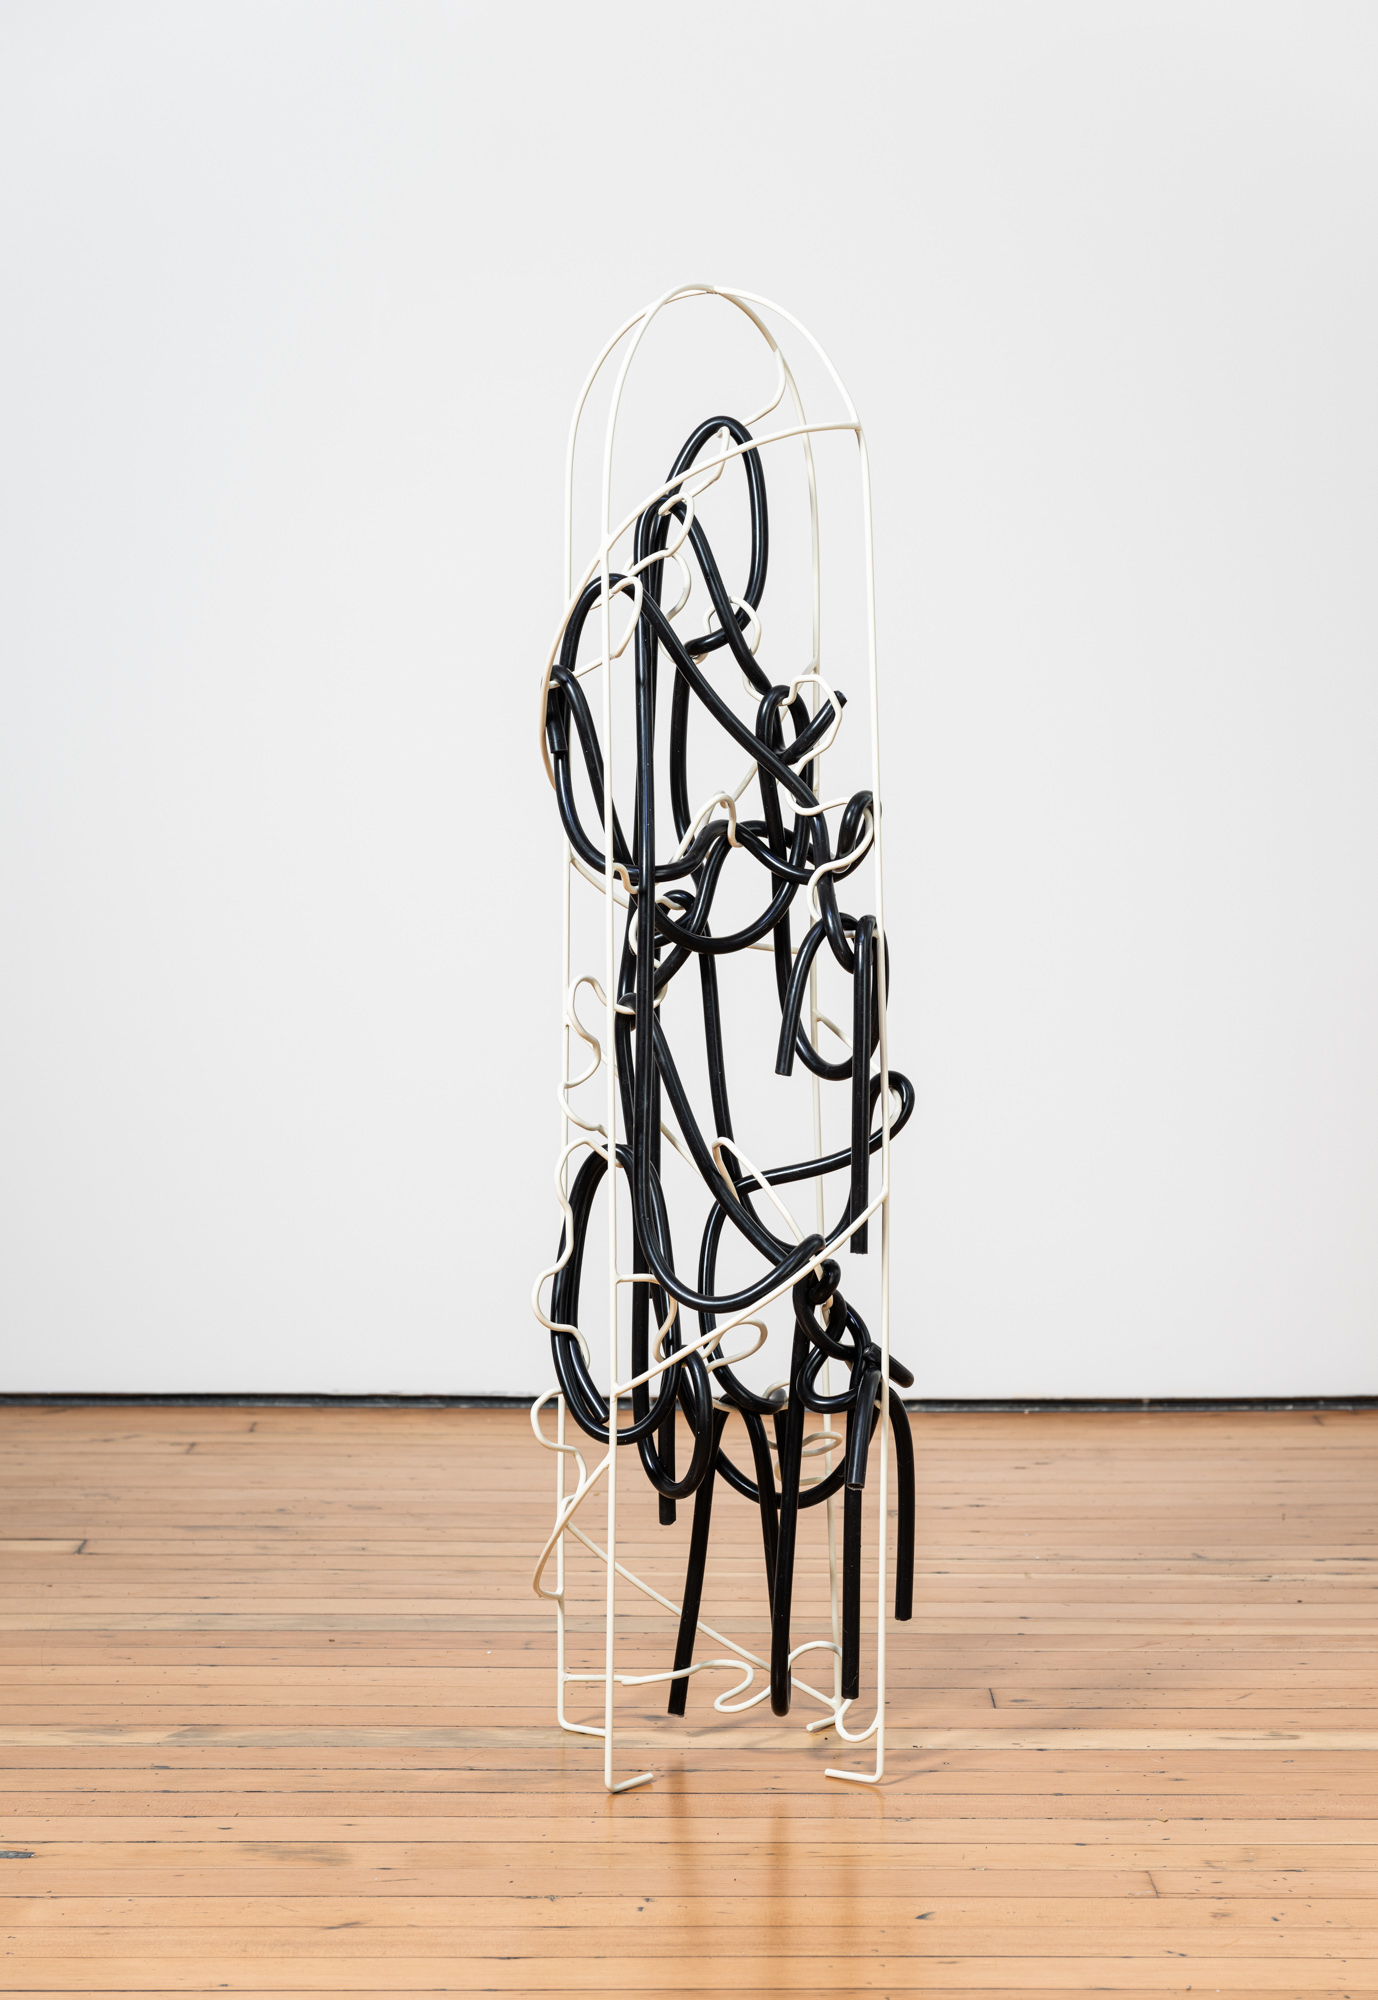 Isabel Yellin, spatial concept, 2023, Powder coated steel, silicone, 53 x 6 x 6 inches